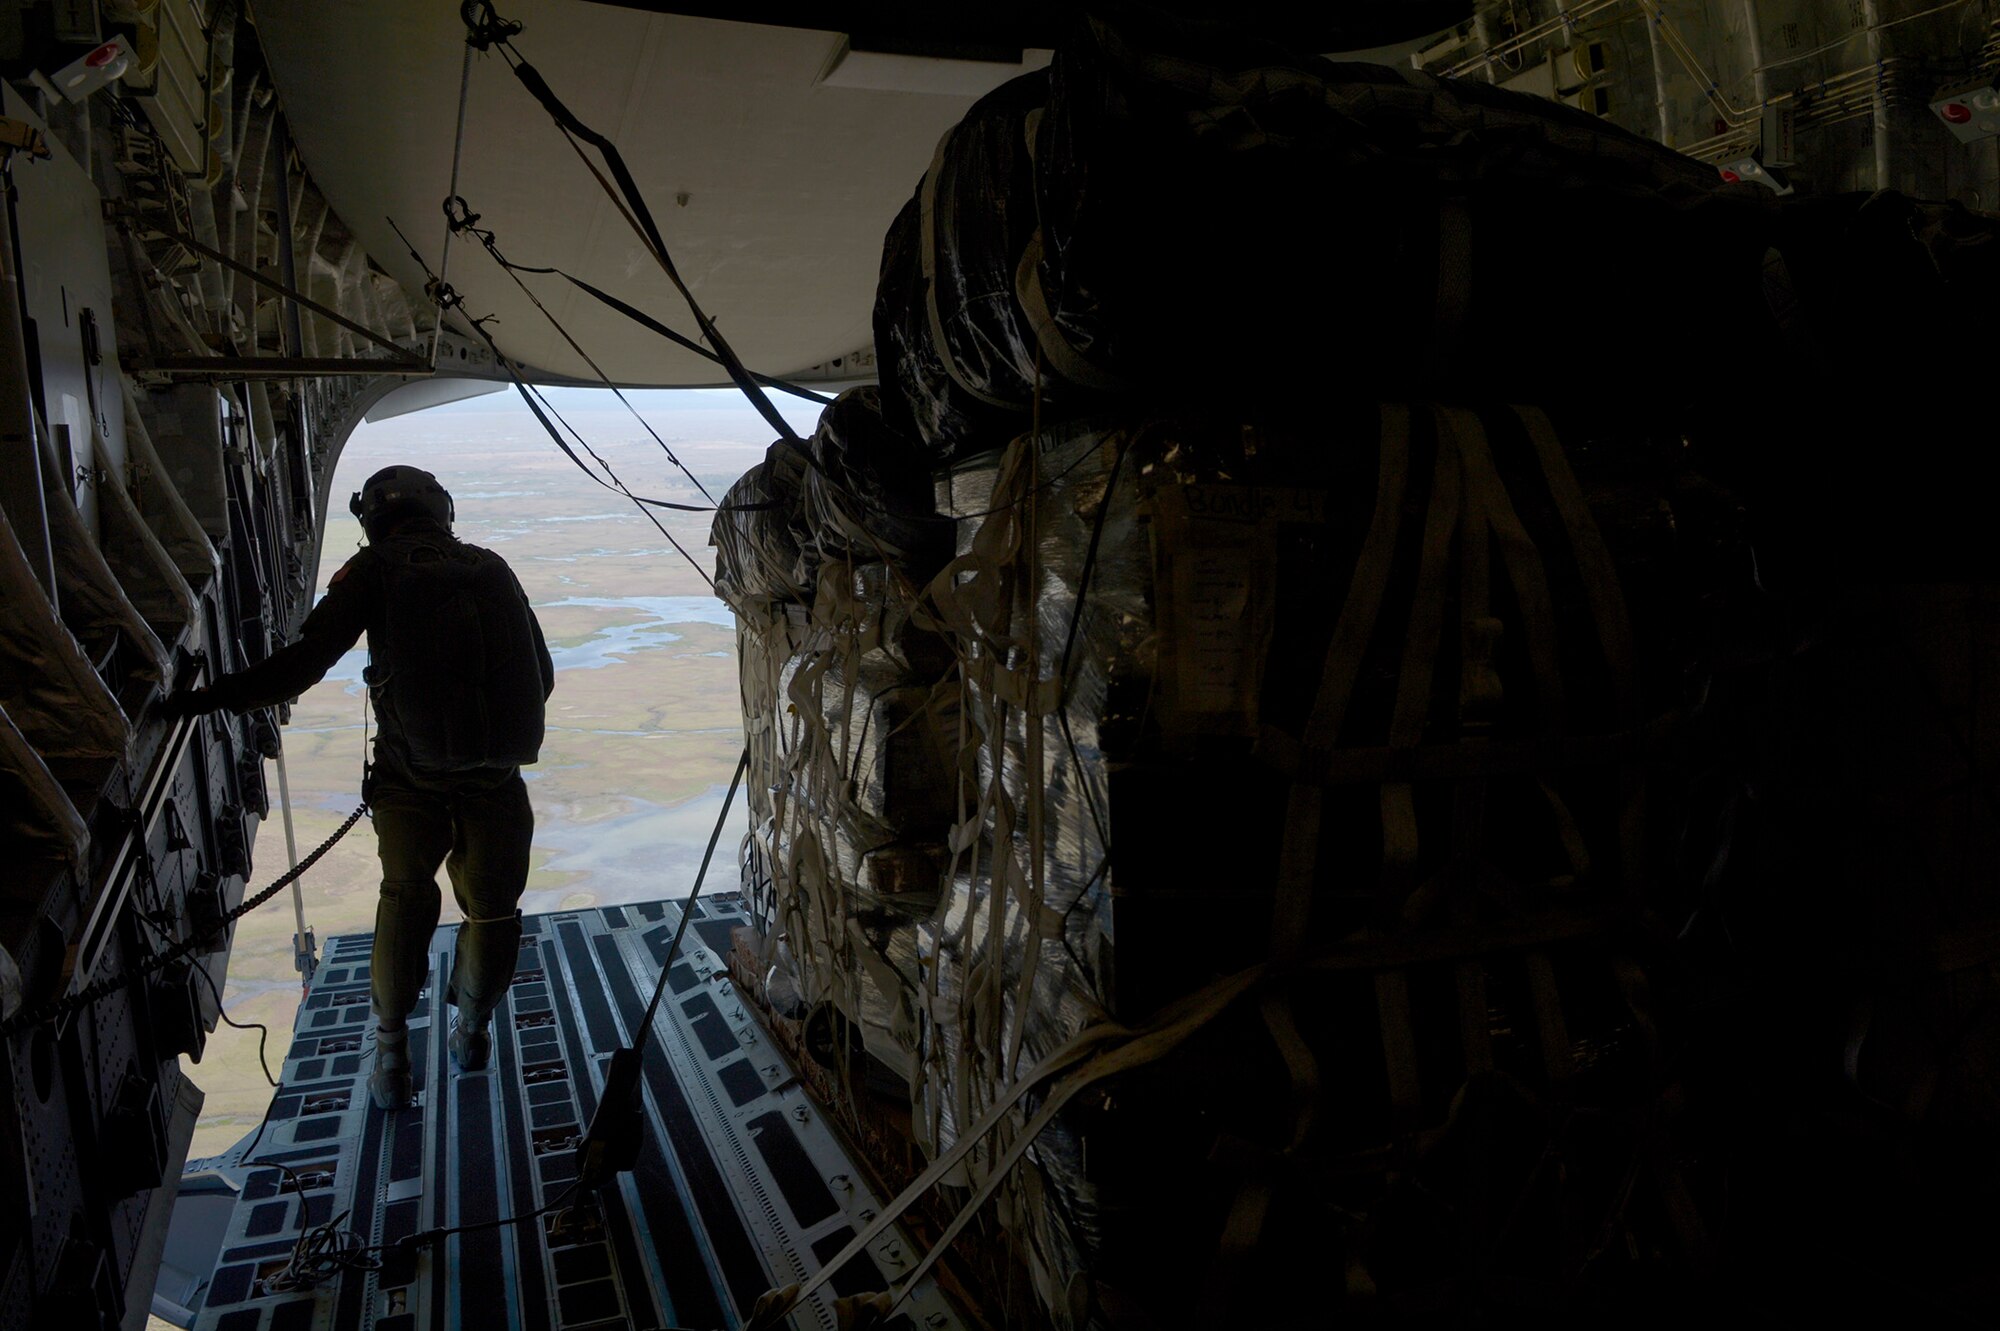 Senior Master Sgt. Ty Brooks, C-17 Globemaster III loadmaster from the 313th Airlift Squadron, inspects equipment prior to air dropping four container delivery systems over Kapyon drop zone, Australia, during Exercise Talisman Sabre July 8. Talisman Sabre 2015 is jointly sponsored by the U.S. Pacific Command and Australian Defence Force Headquarters Joint Operations Command. This was the first opportunity for Reserve pilots and loadmasters from the 446th OG to participate in the exercise, which now has six iterations. (U.S. Air Force photo by Tech. Sgt. Jason Robertson)